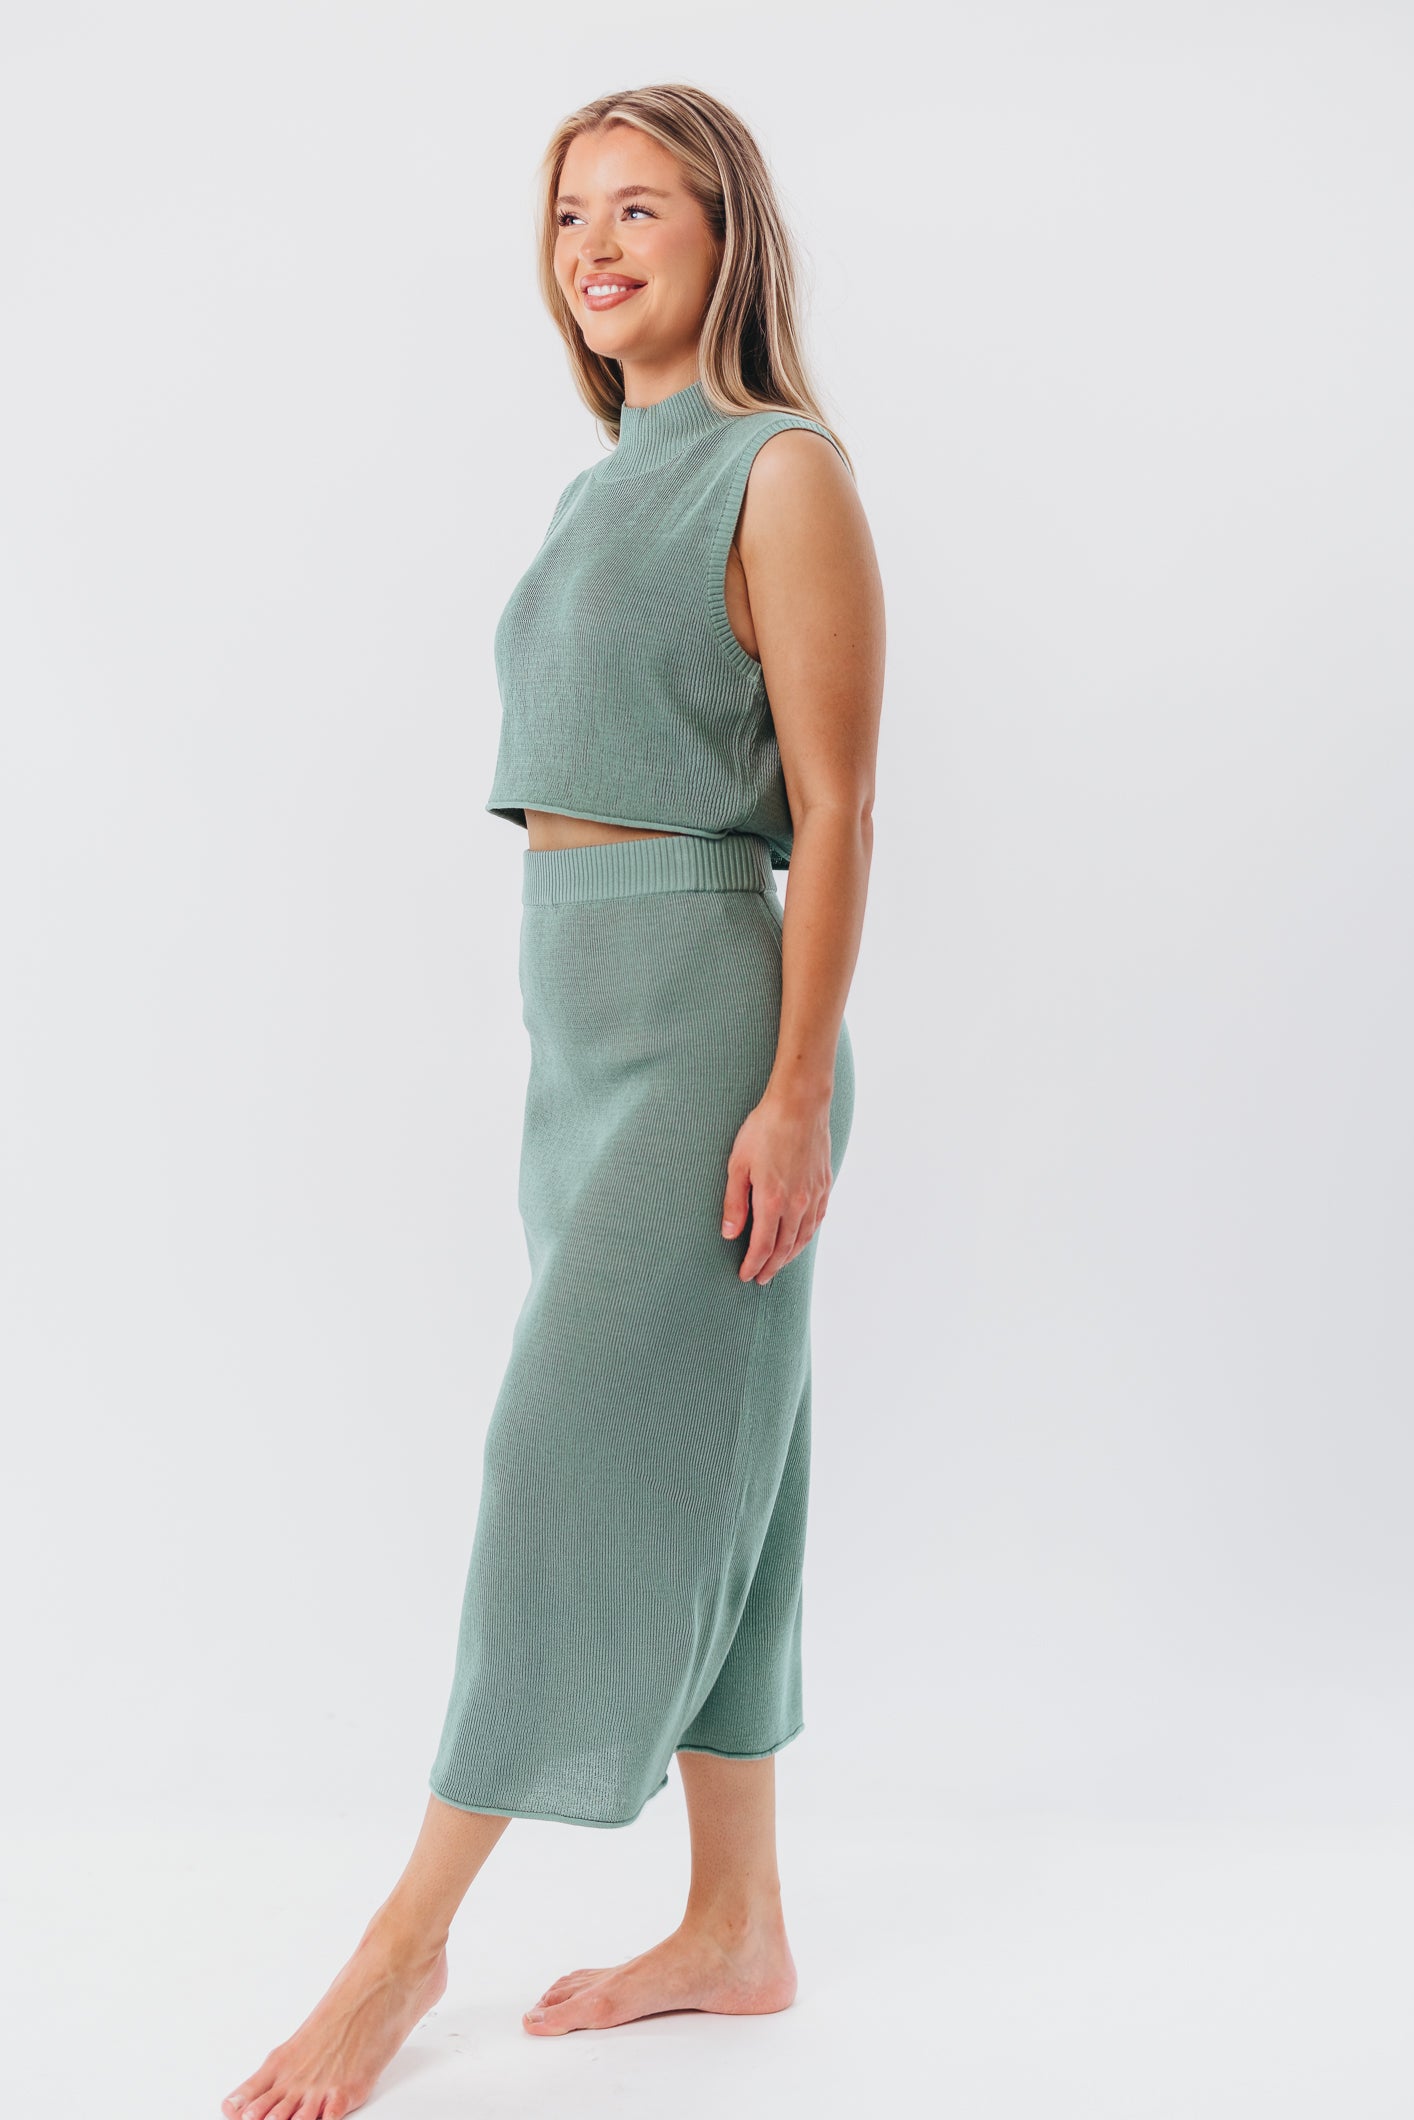 Cassie Knit Midi Skirt in Teal Green